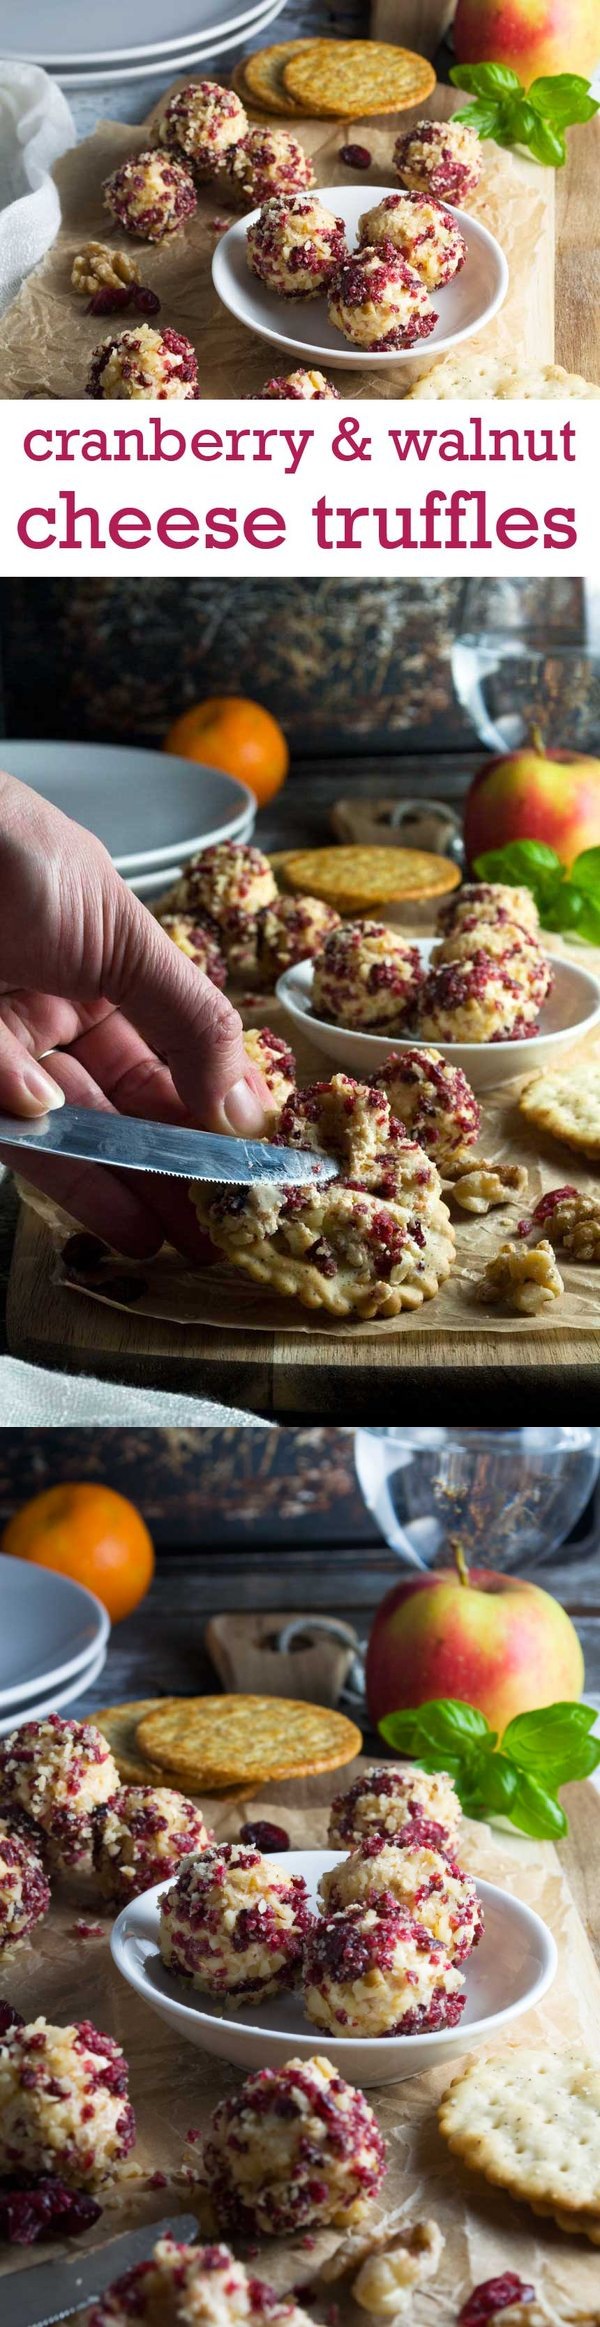 Cranberry and walnut cheese truffles